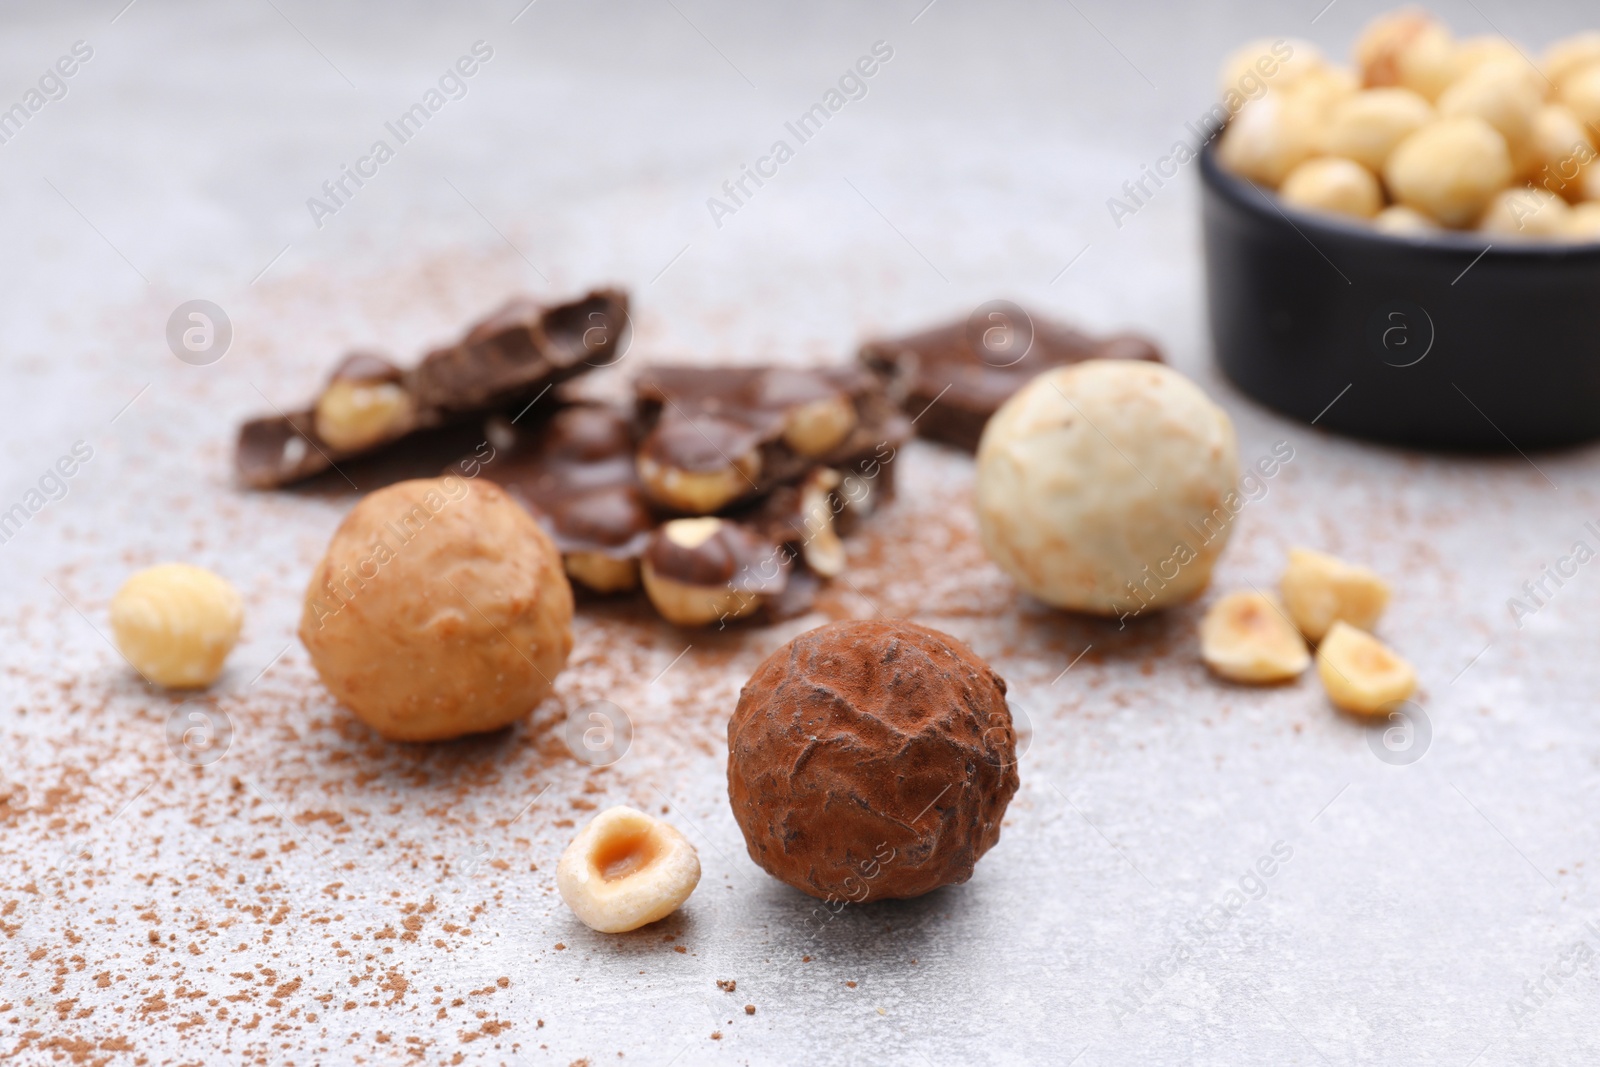 Photo of Tasty chocolate candies and nuts on light grey table